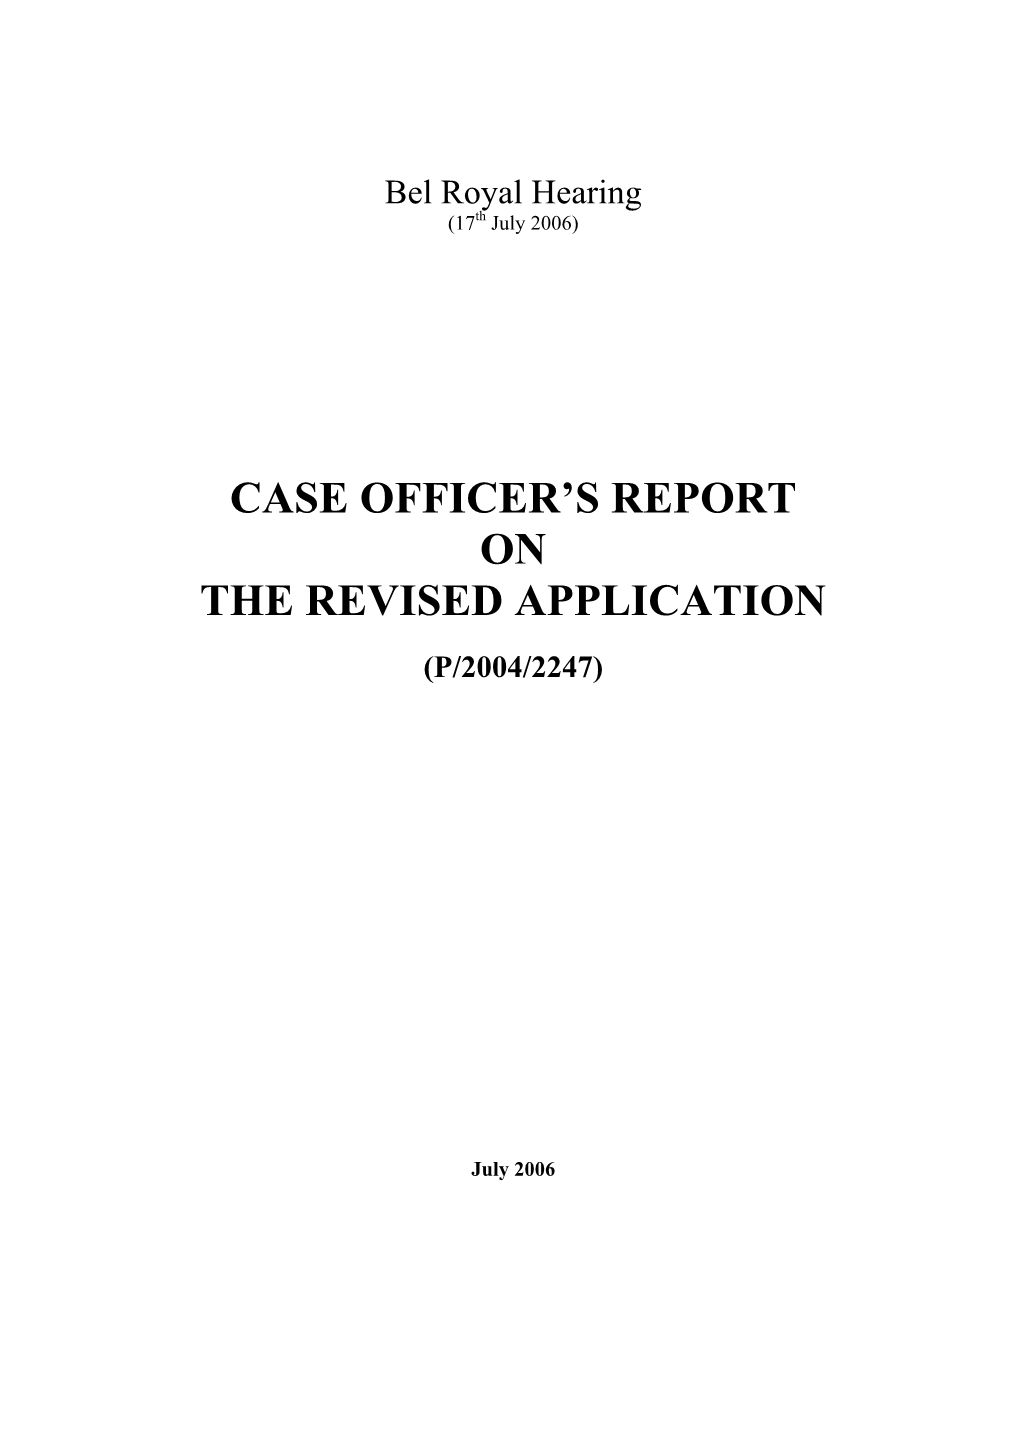 Report on the Revised Application